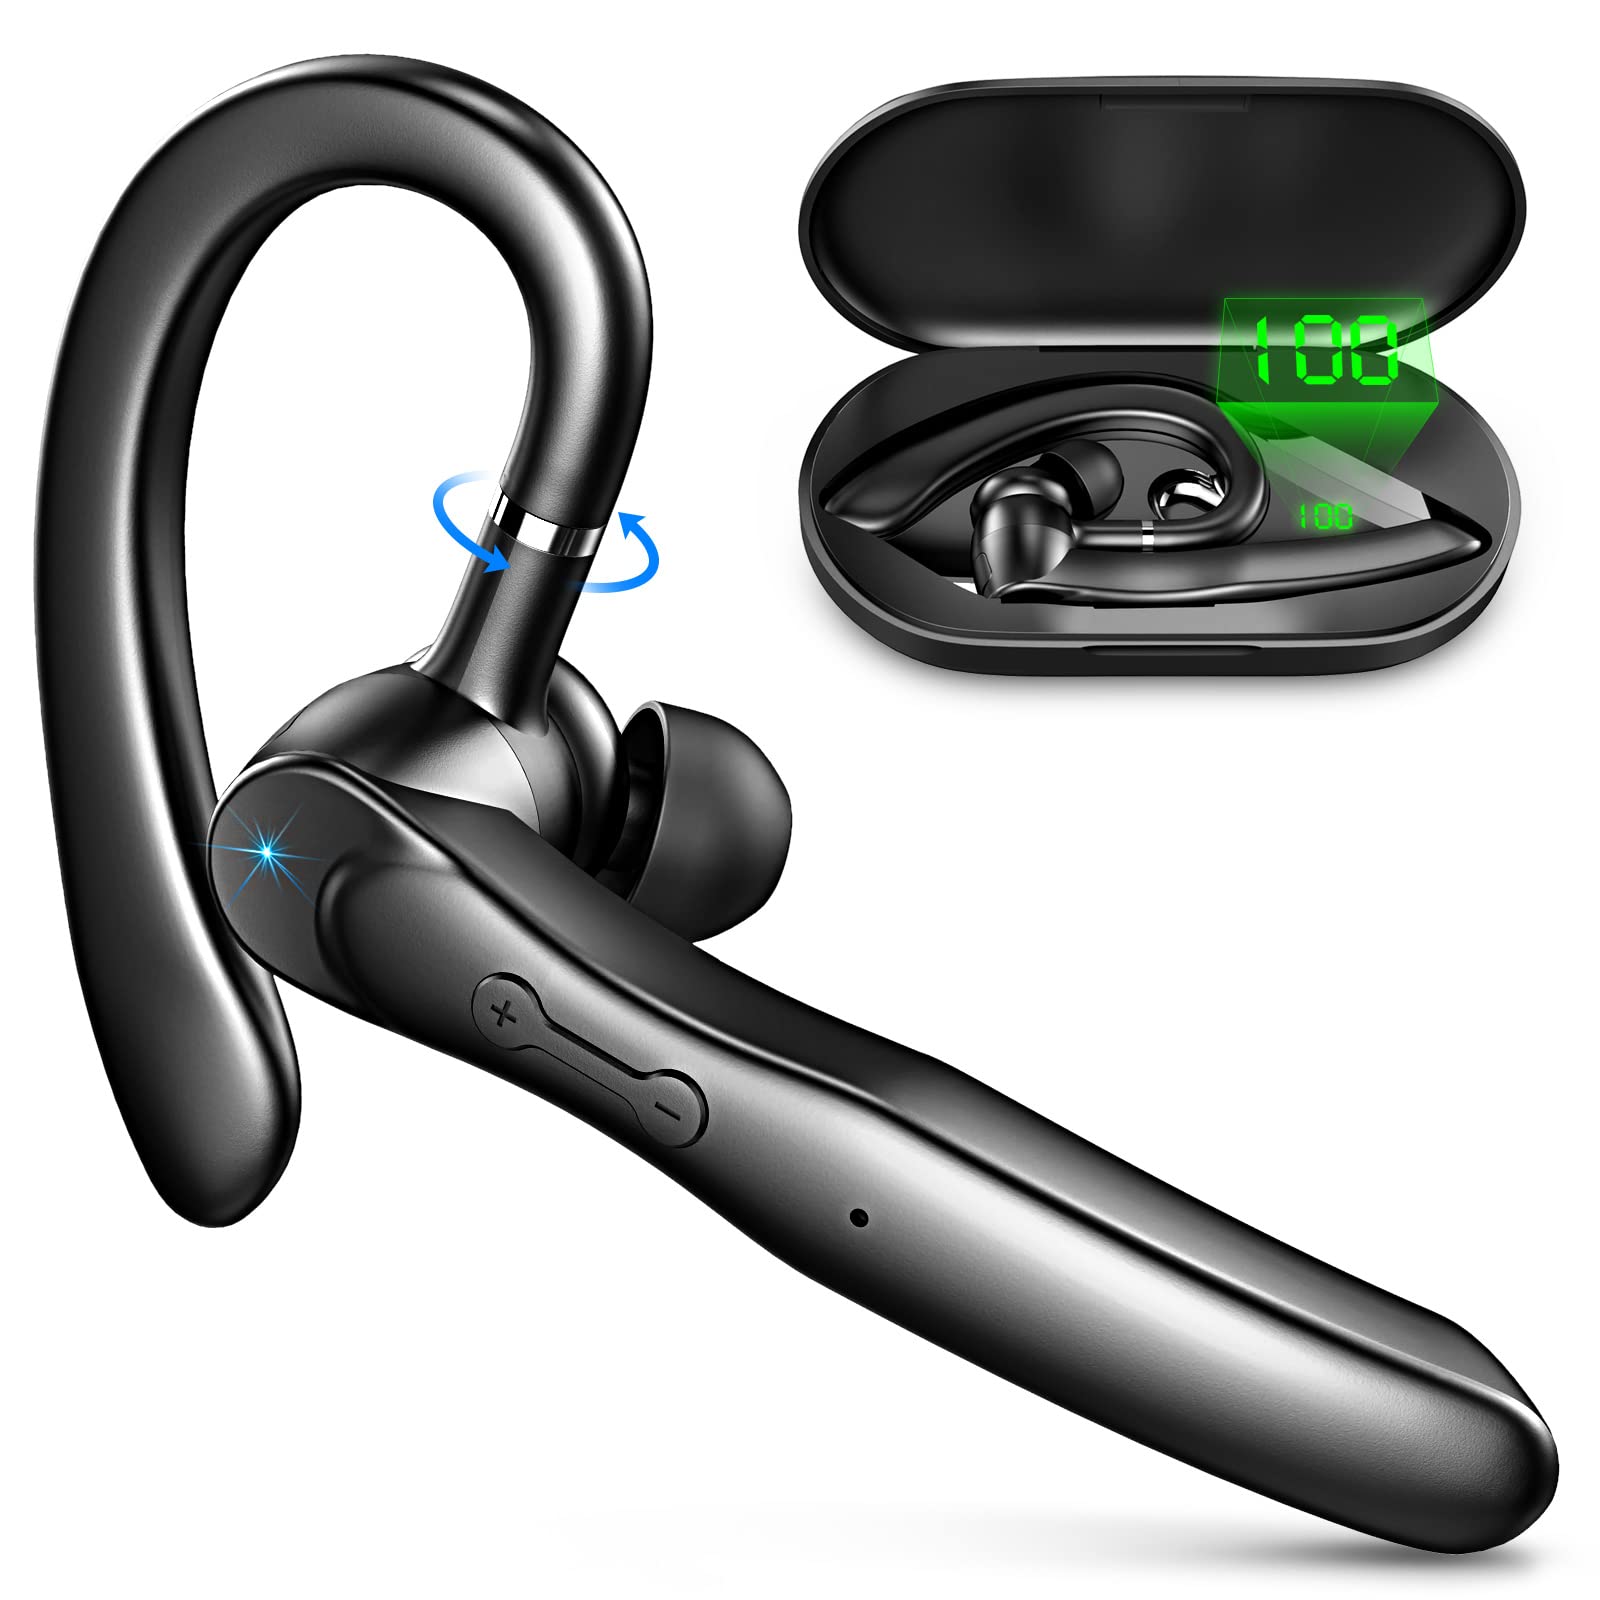 Bluetooth Earphone Hands-free With Mic - Black